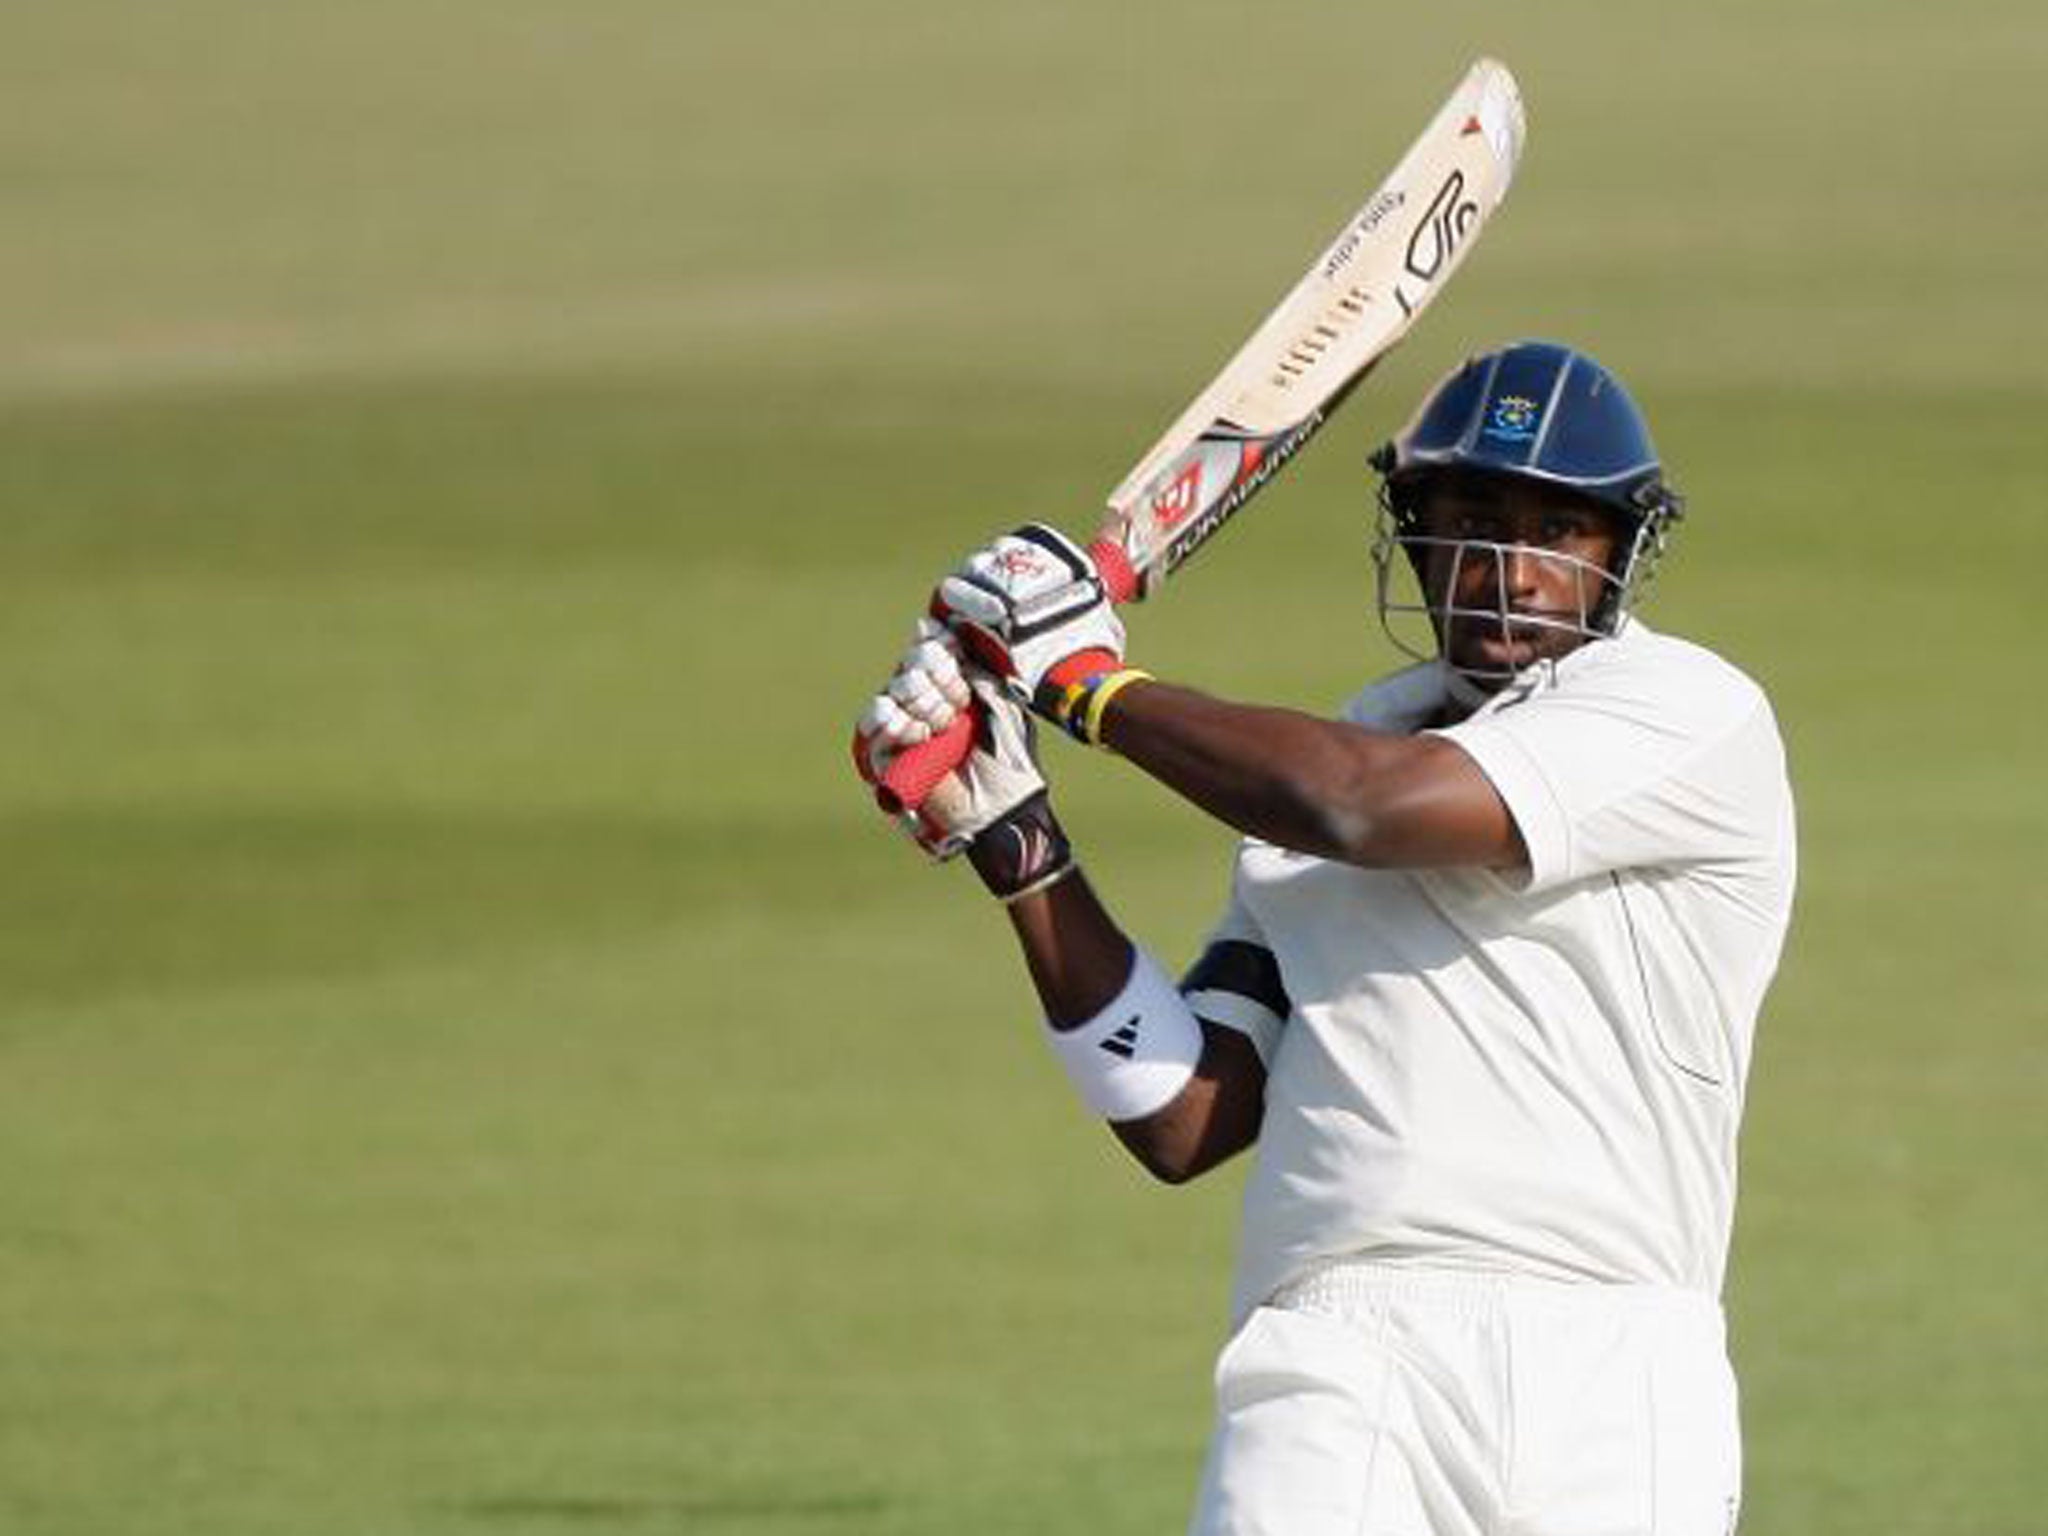 Michael Carberry boosted his hopes of an England recall